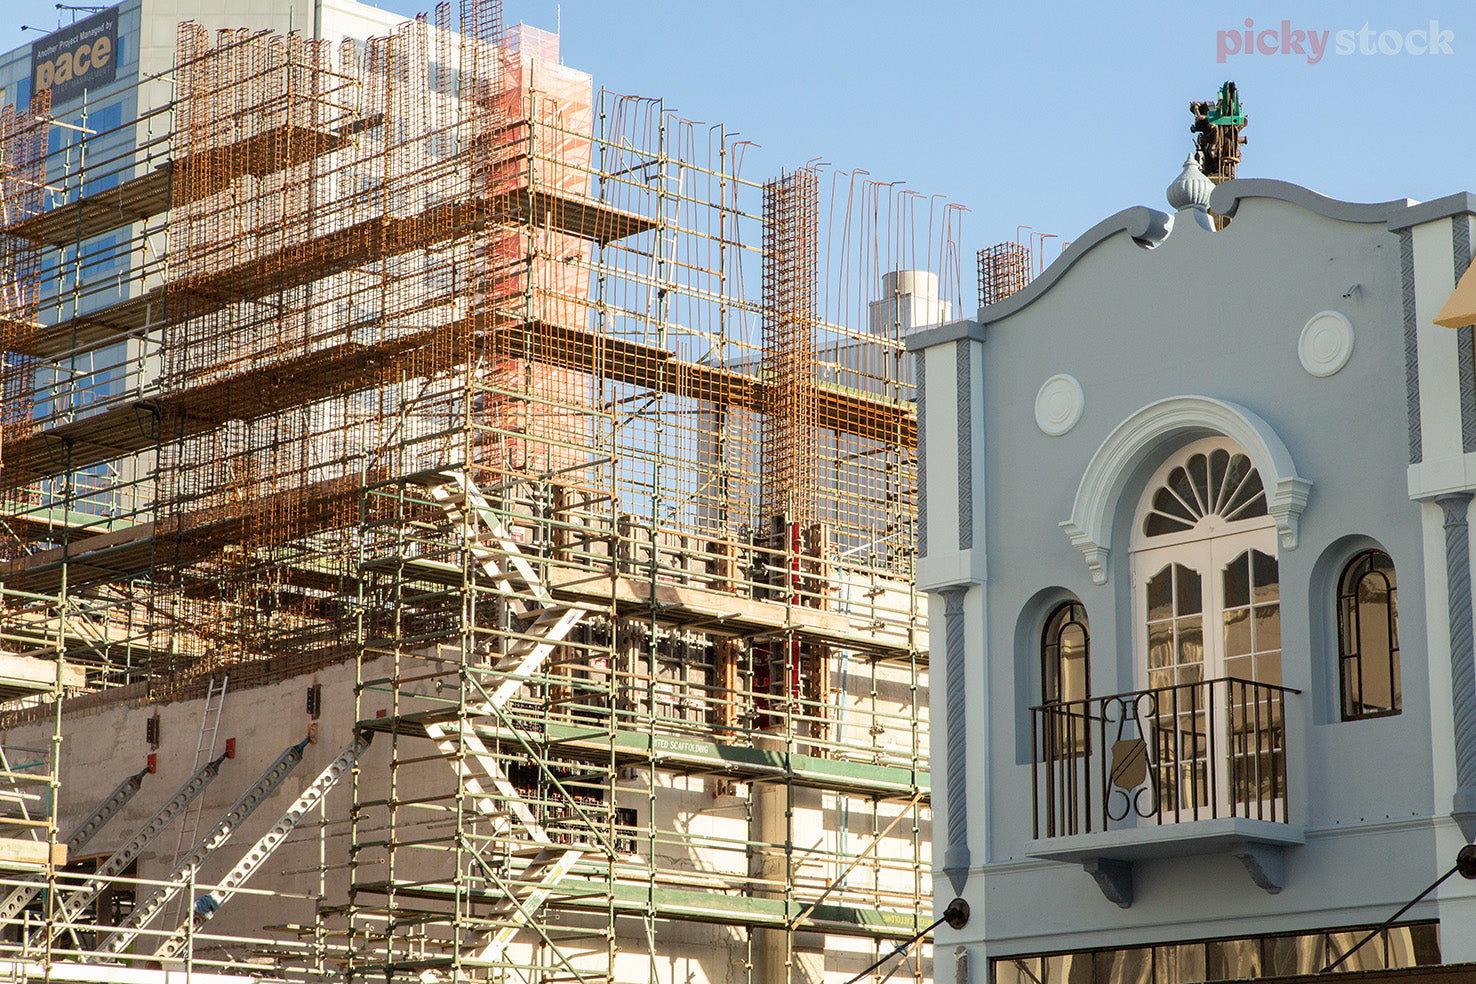 Scafolding and construction surrounding a building after the Christchurch earthquake. Blue sky. Old blue with white trim victorian building left of frame. 